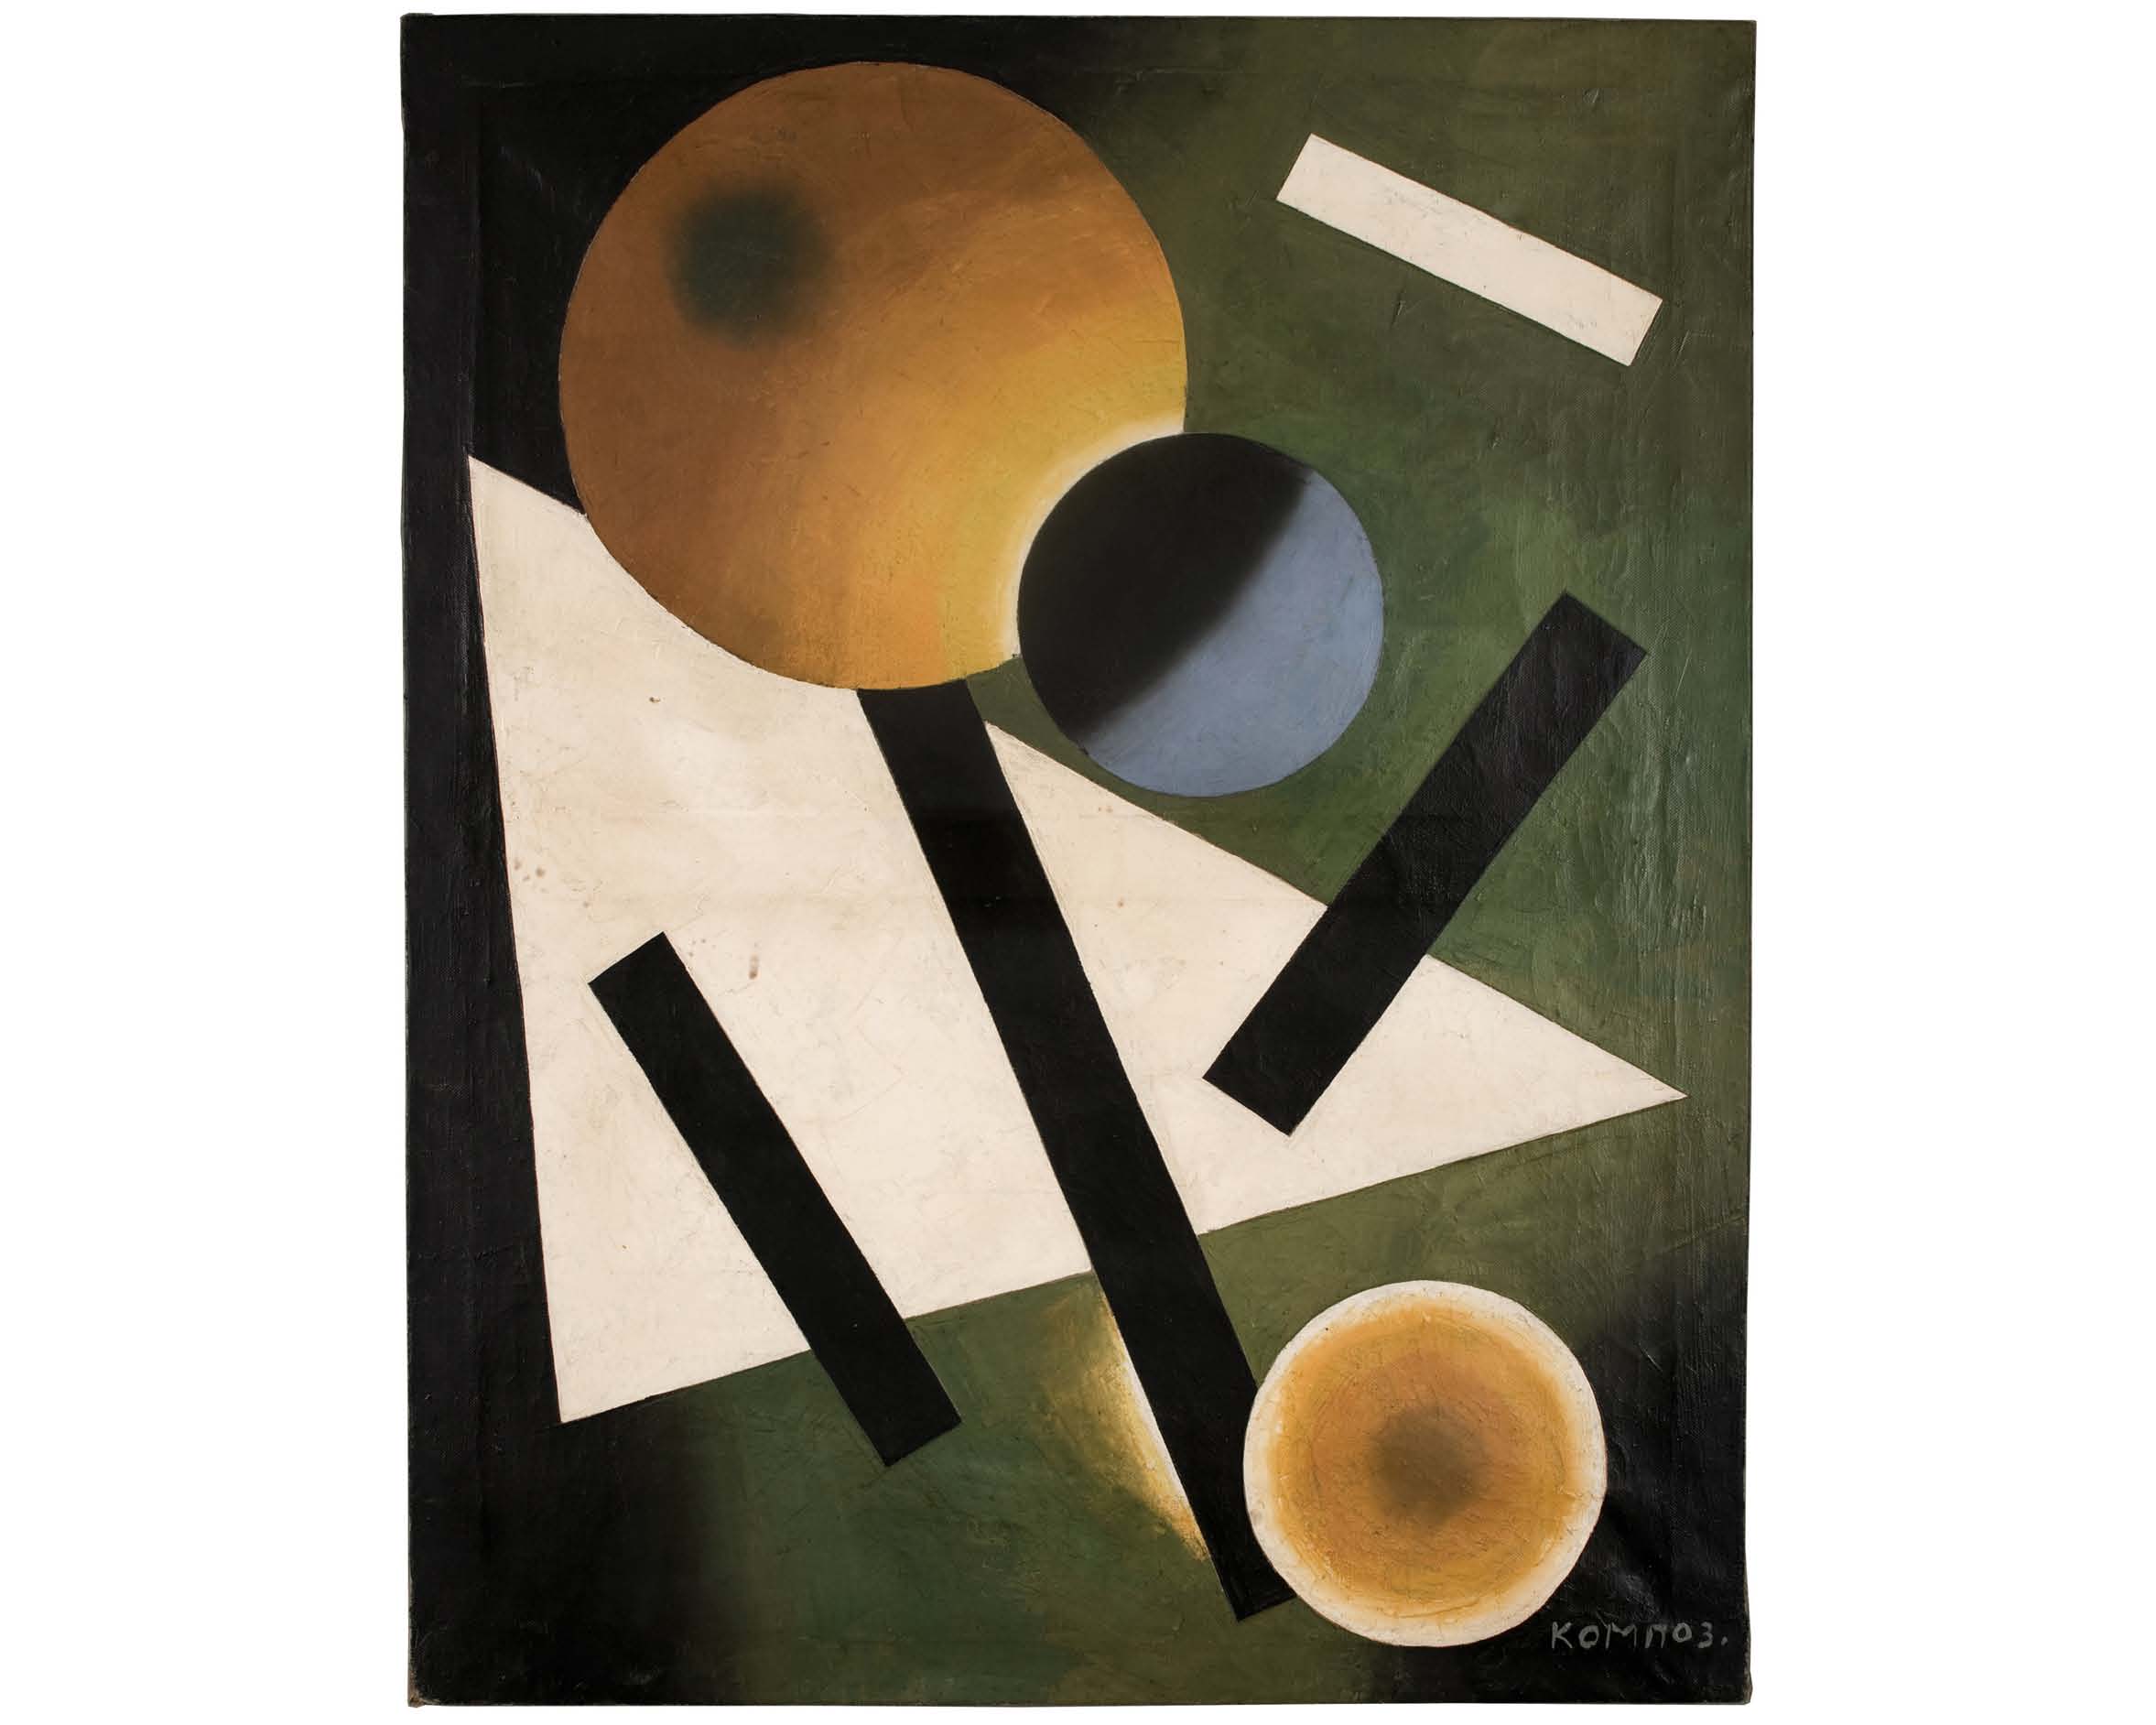   Unattributed. Unsigned.     In the style of Alexander Rodchenko.   Text in Russian, lower right corner, translates to “Composition”.&nbsp;  Oil on canvas. 74 x 59.5 cm. 